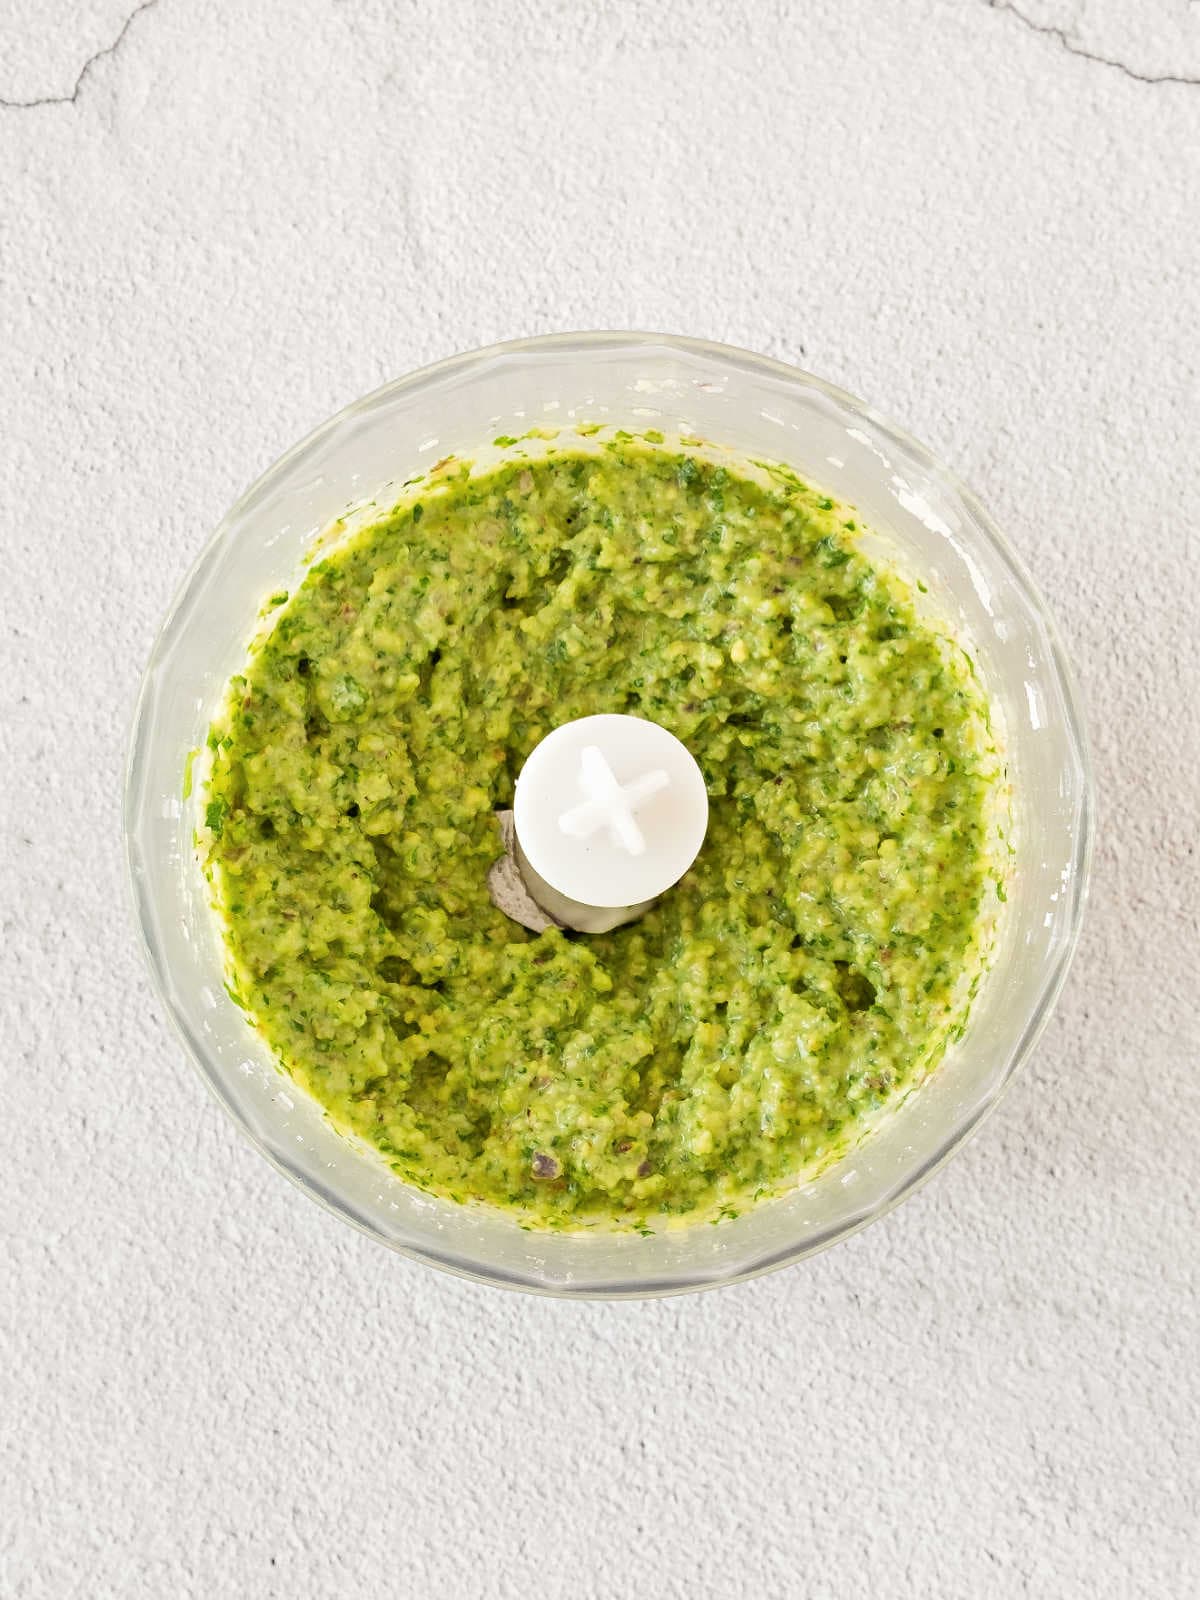 Food processor bowl with pesto. Top view. Gray background.